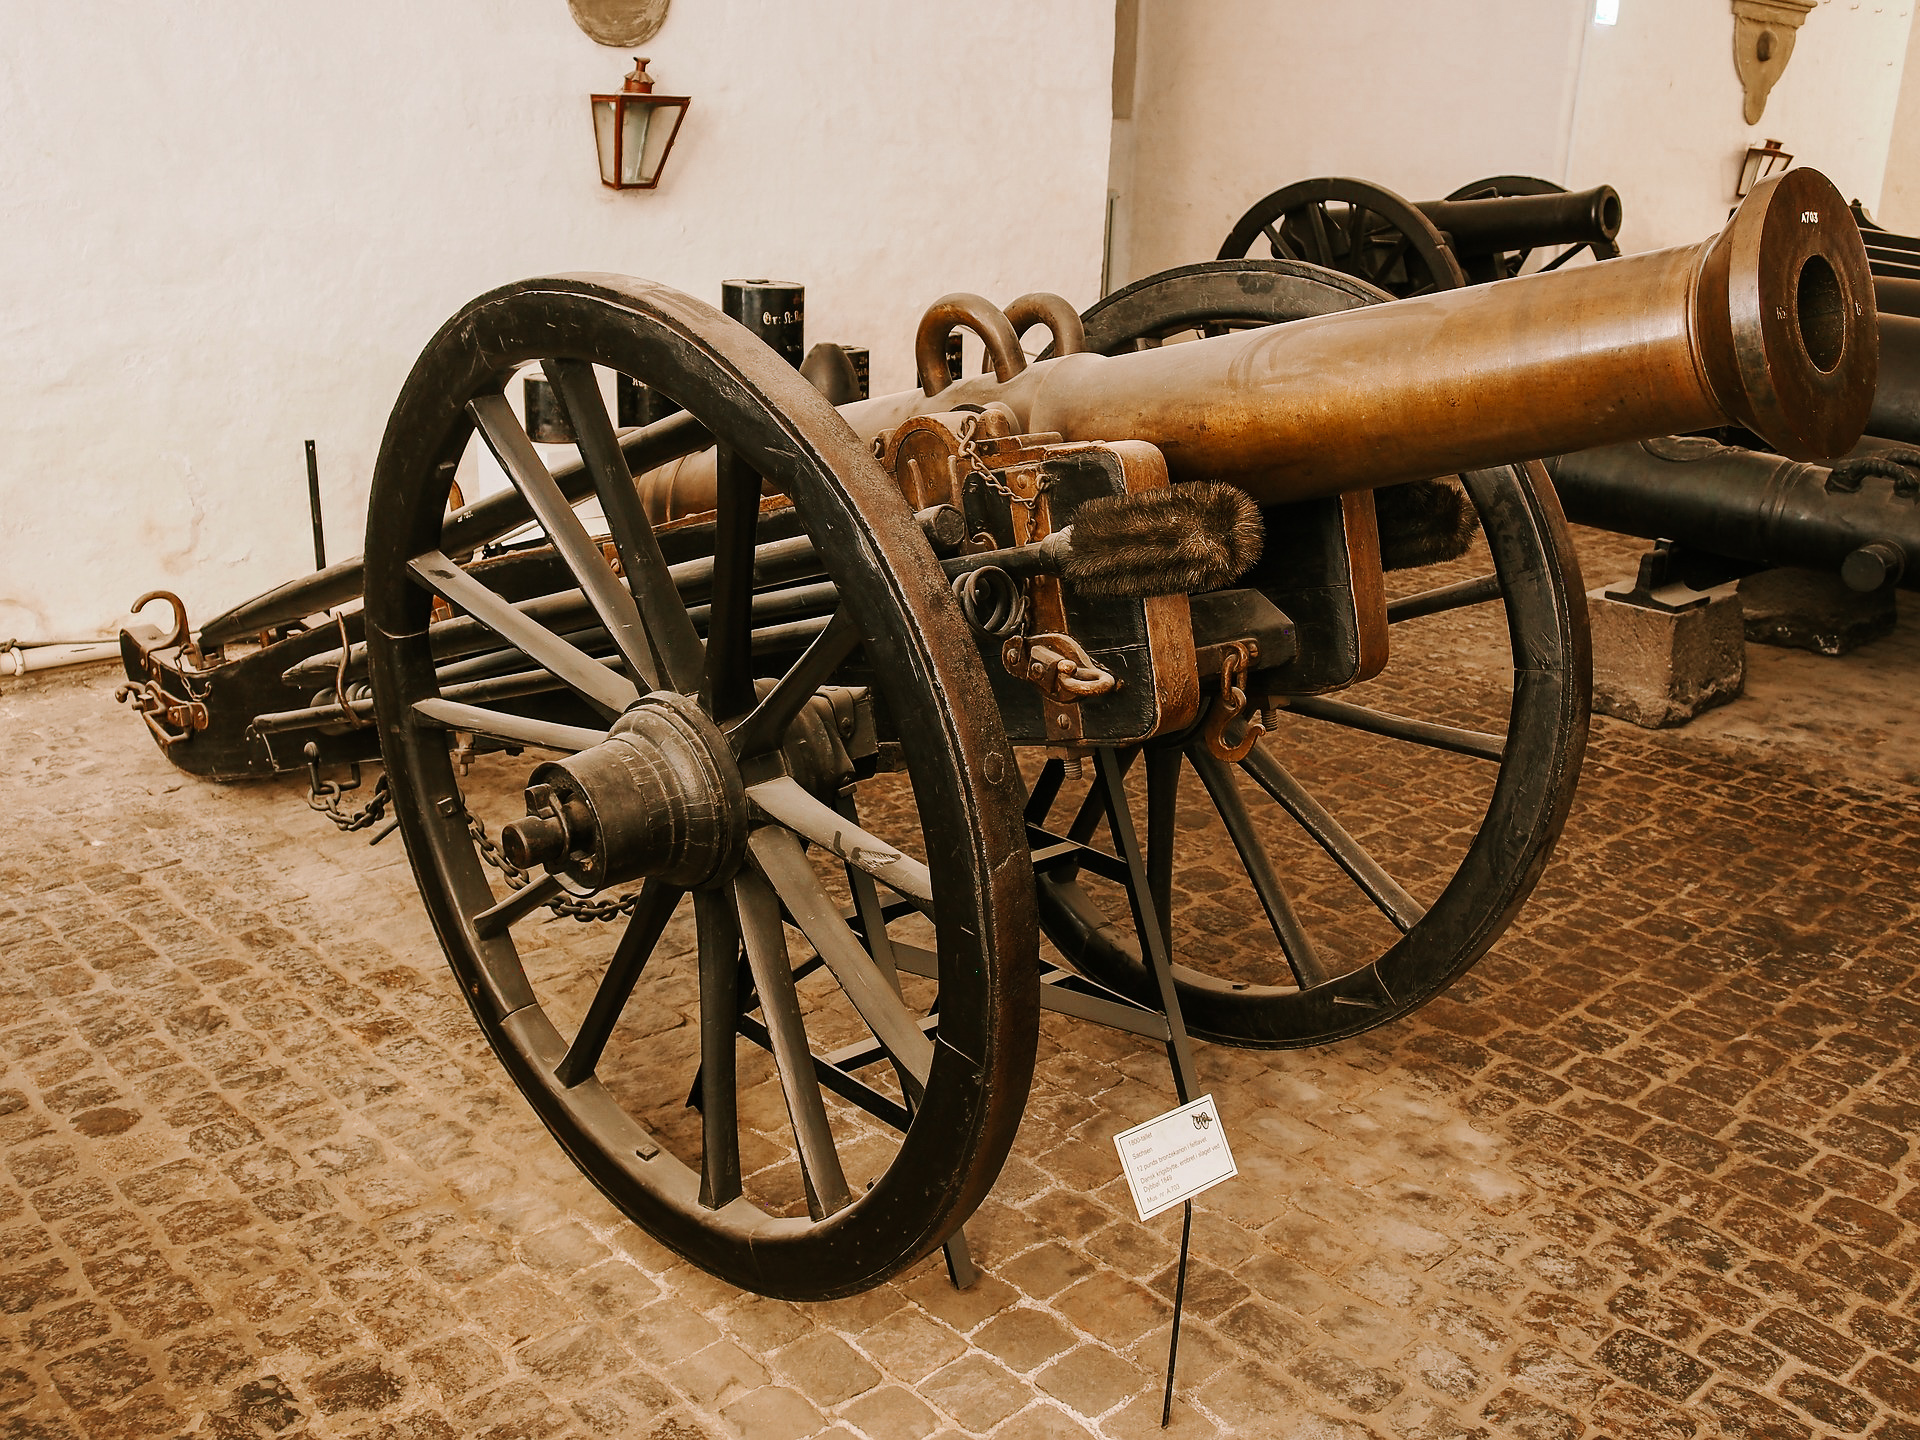 A picture of a metal canon that looks worn, in a white room with cobblestone floors.